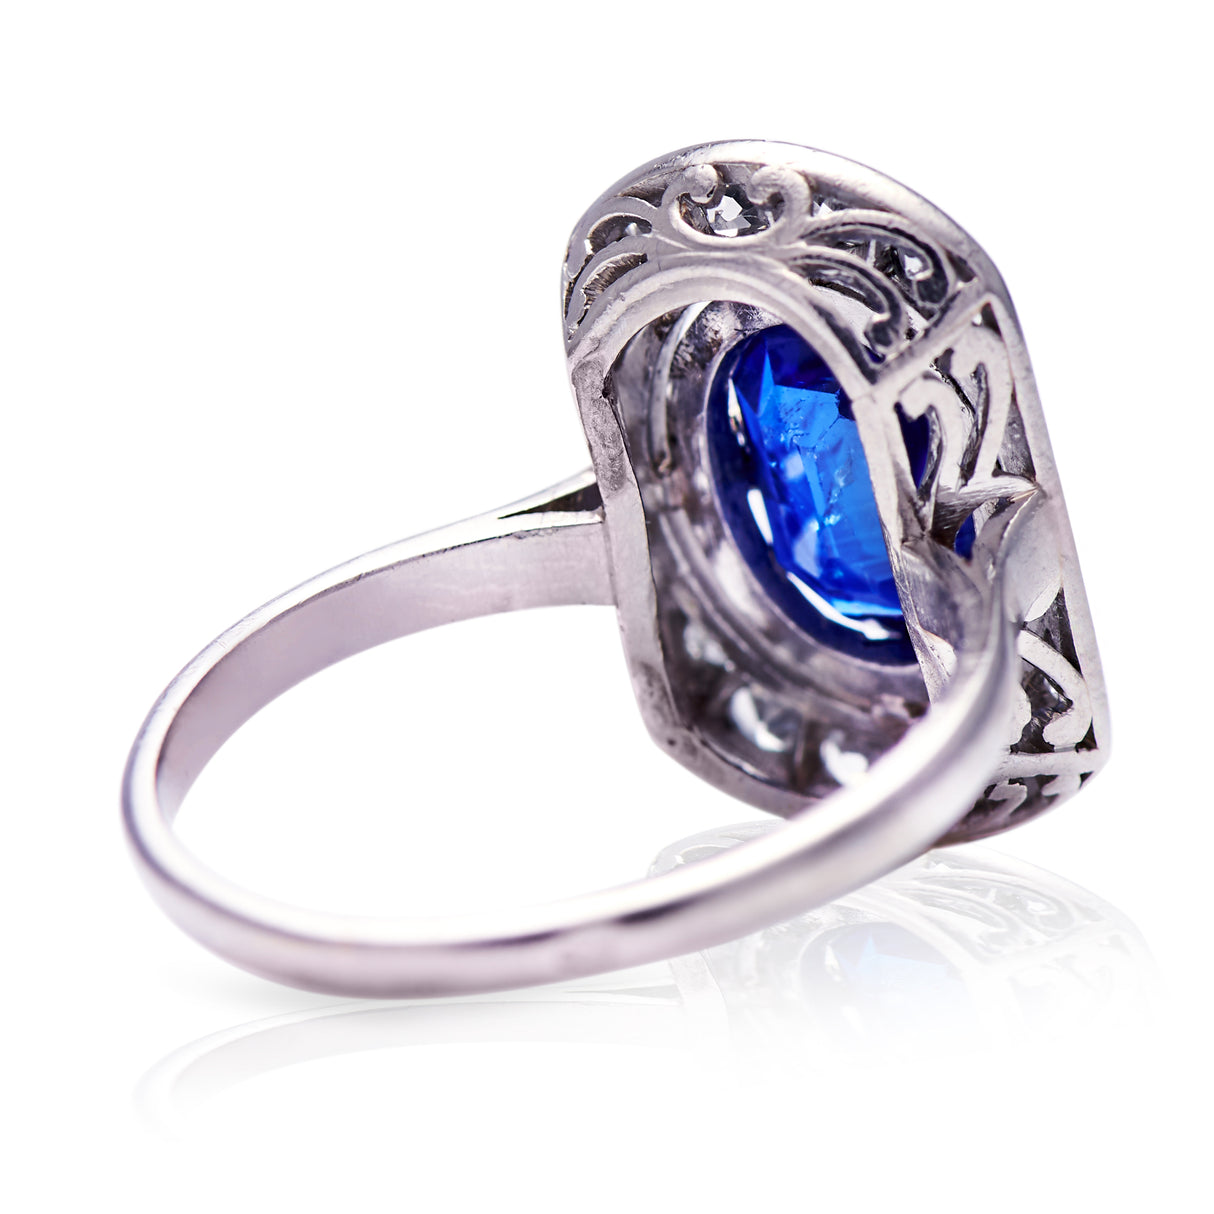 Belle Époque, French, Platinum, Sapphire and Diamond Ring